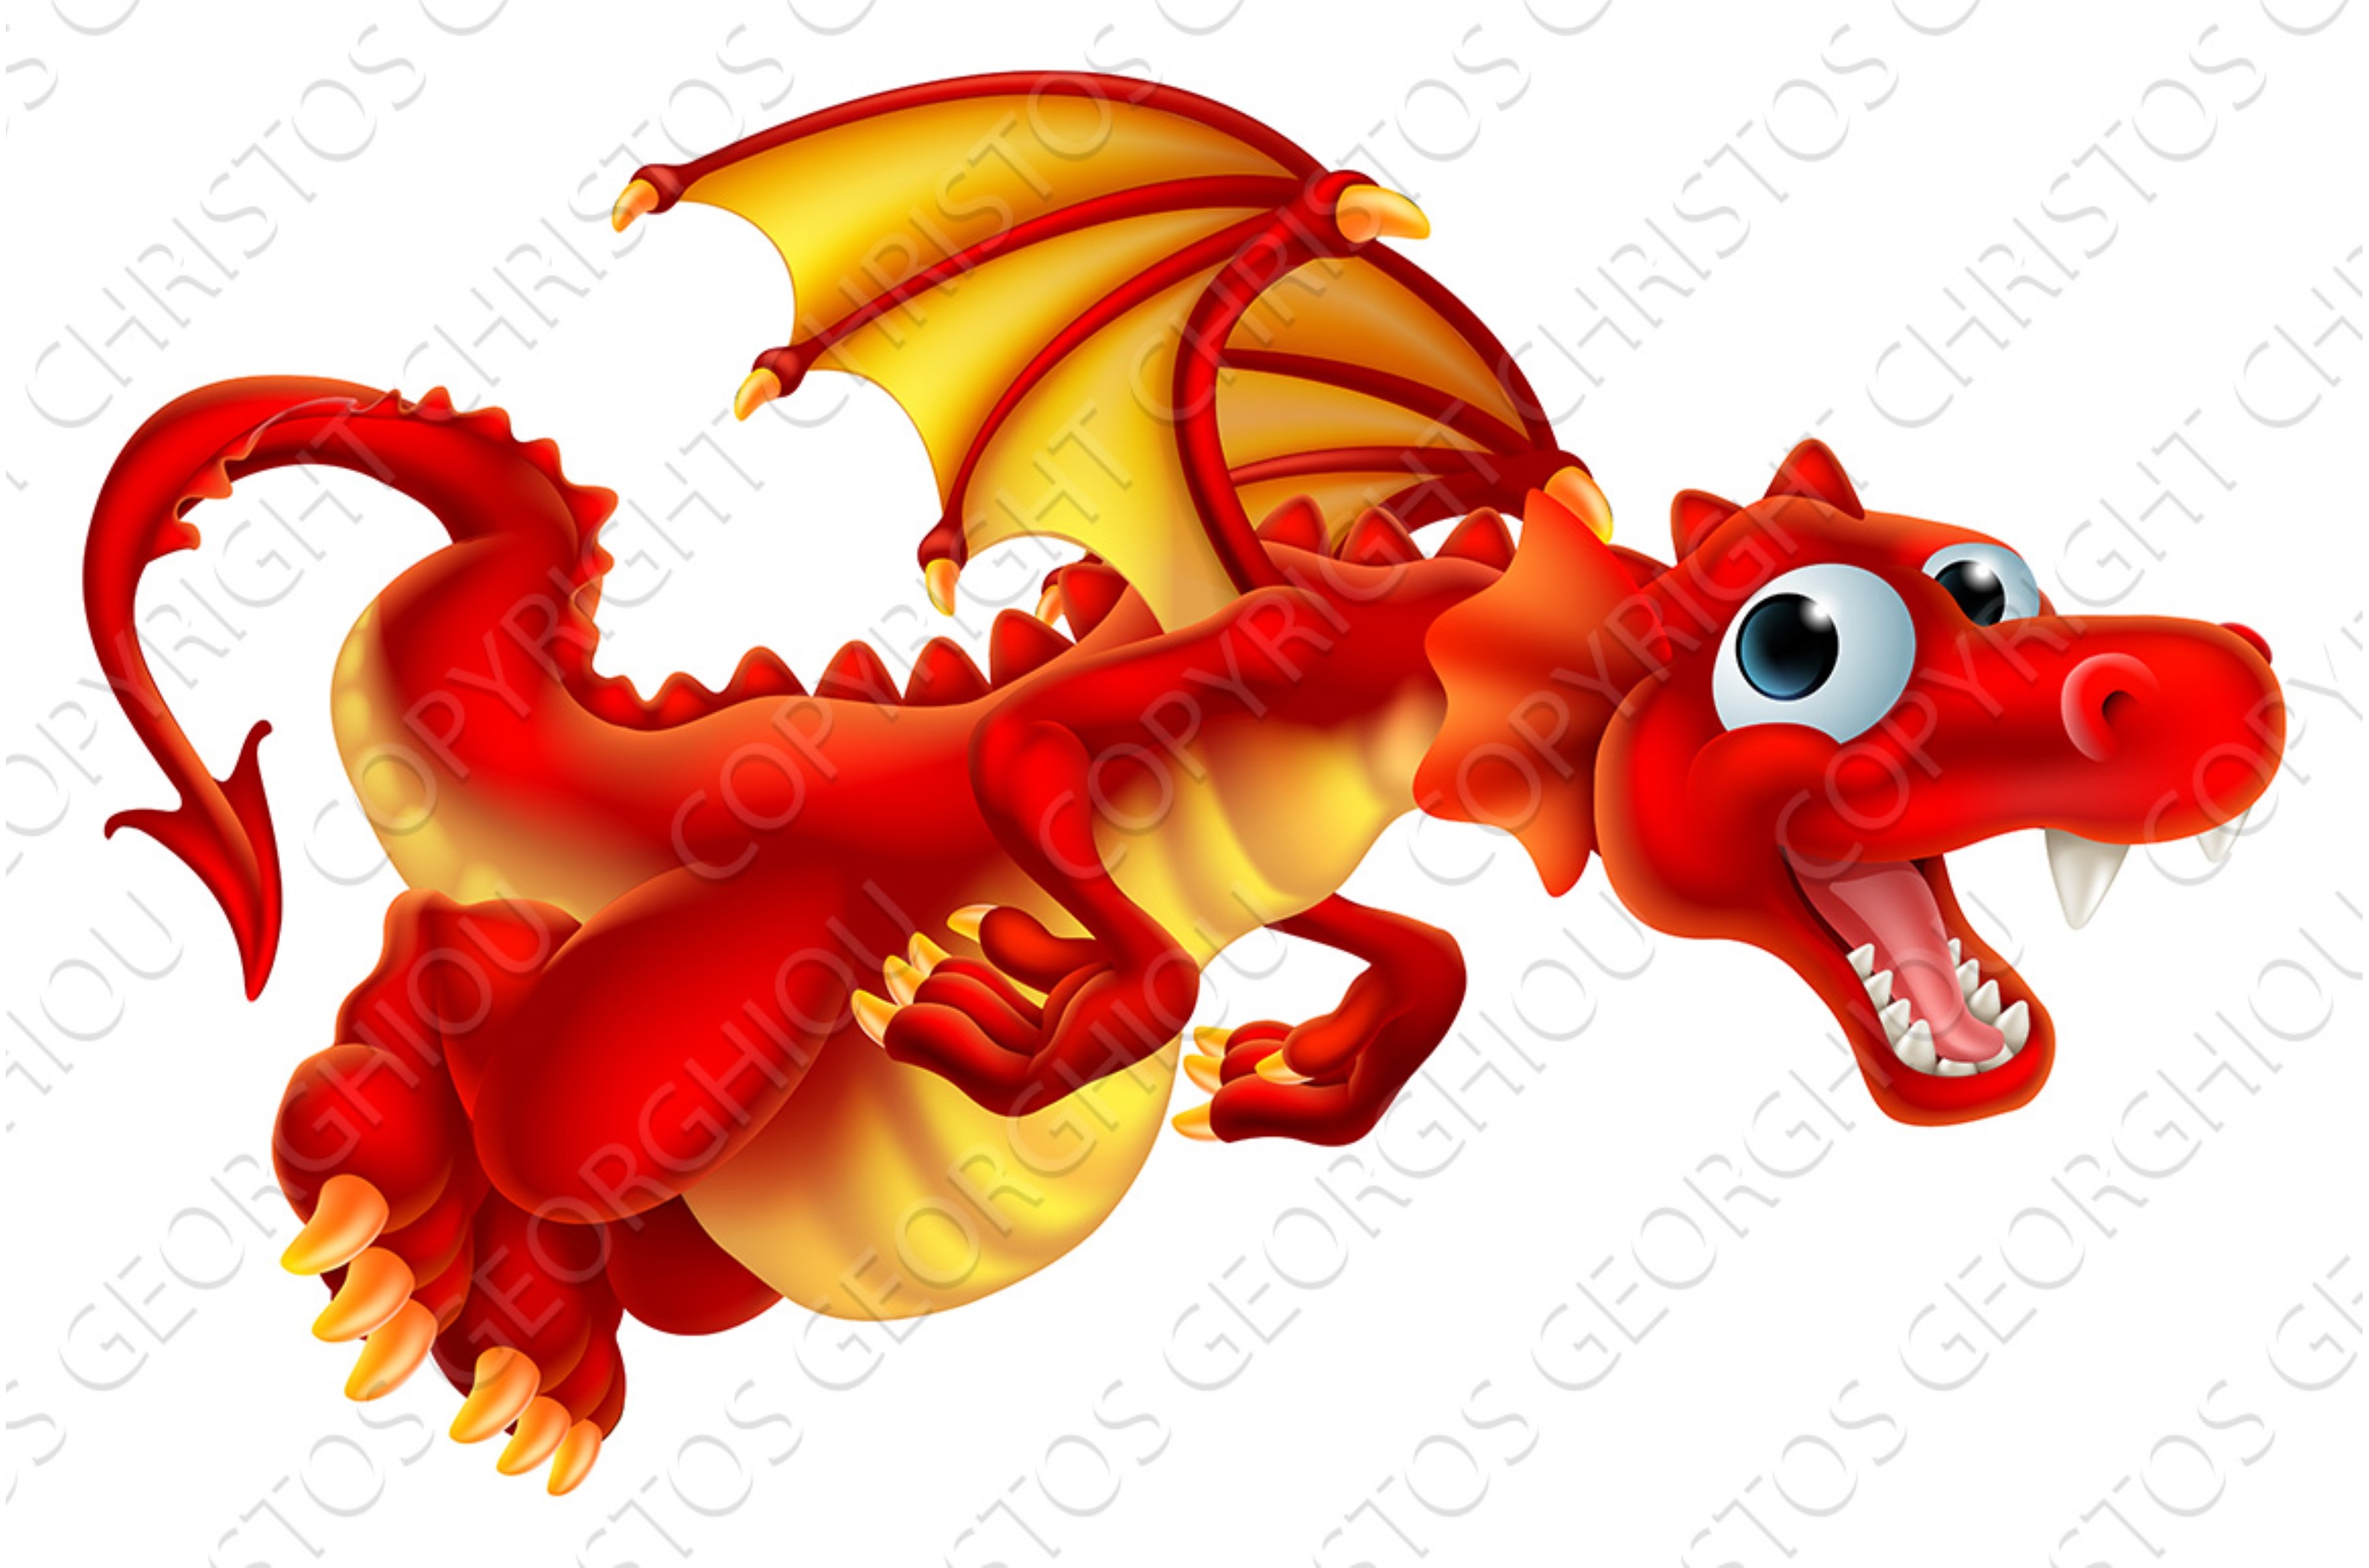 red dragon flying fire